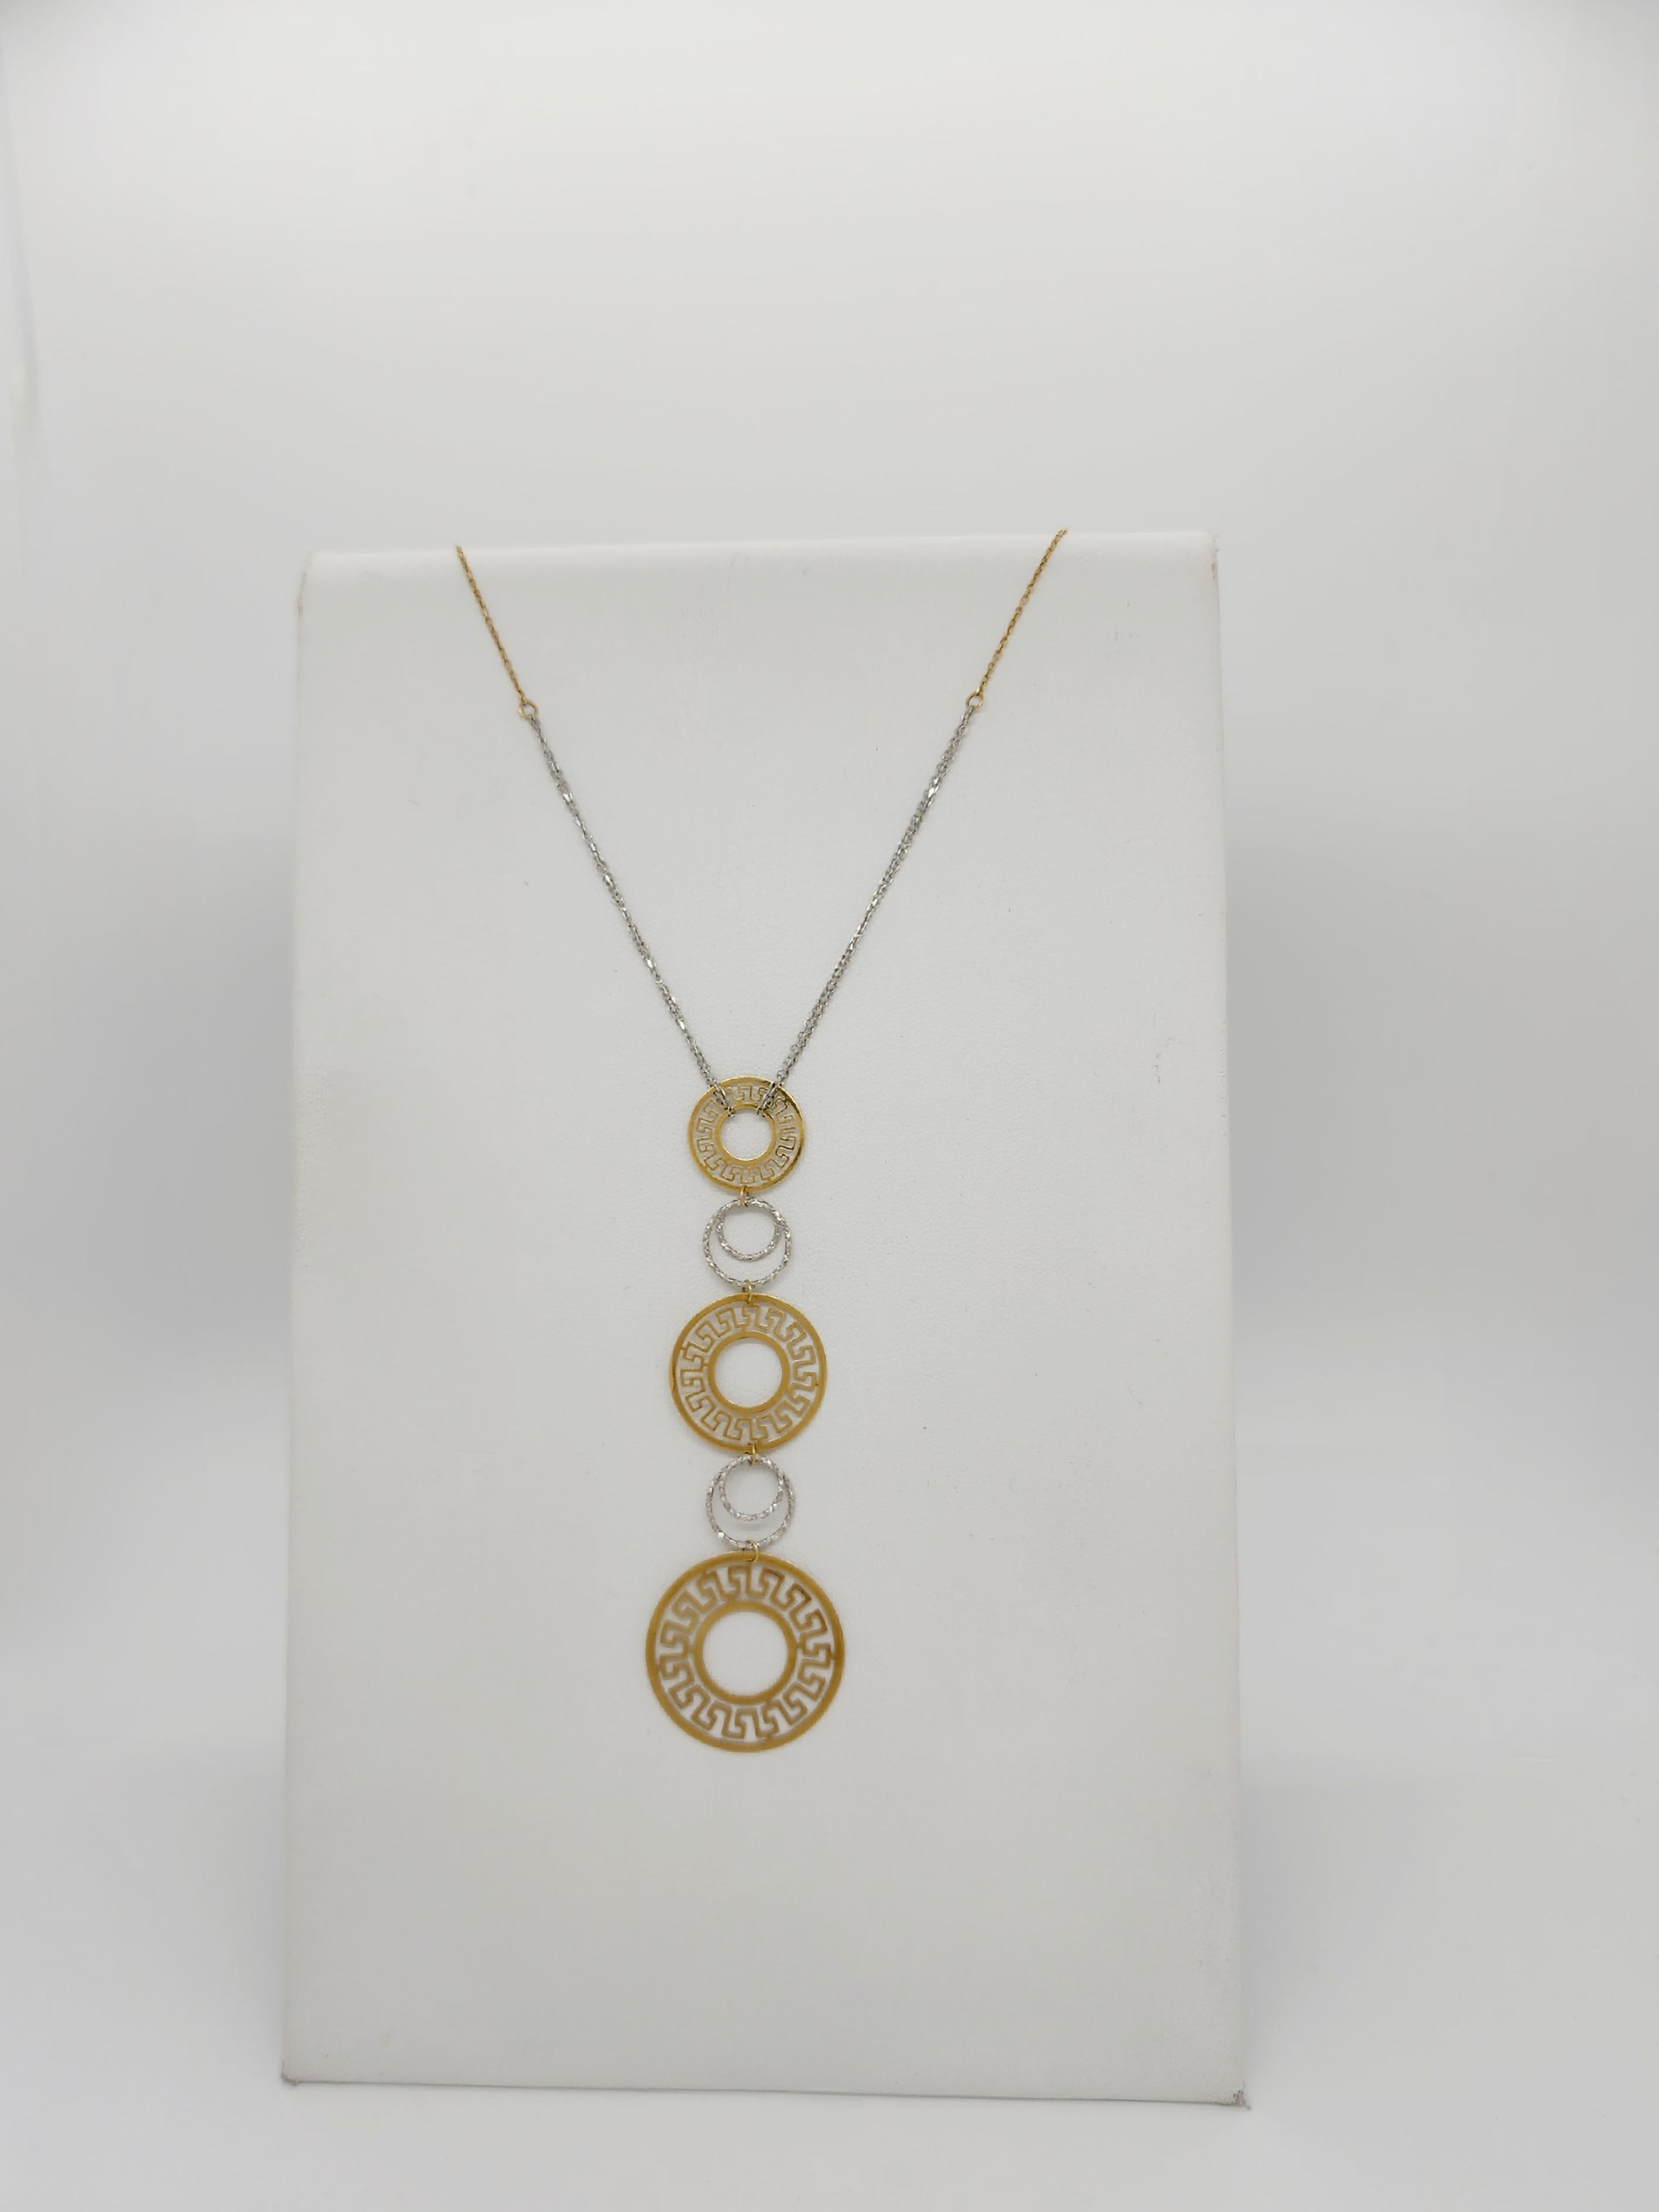 Women's or Men's Circular Design 18k Two Tone Gold Pendant Necklace For Sale